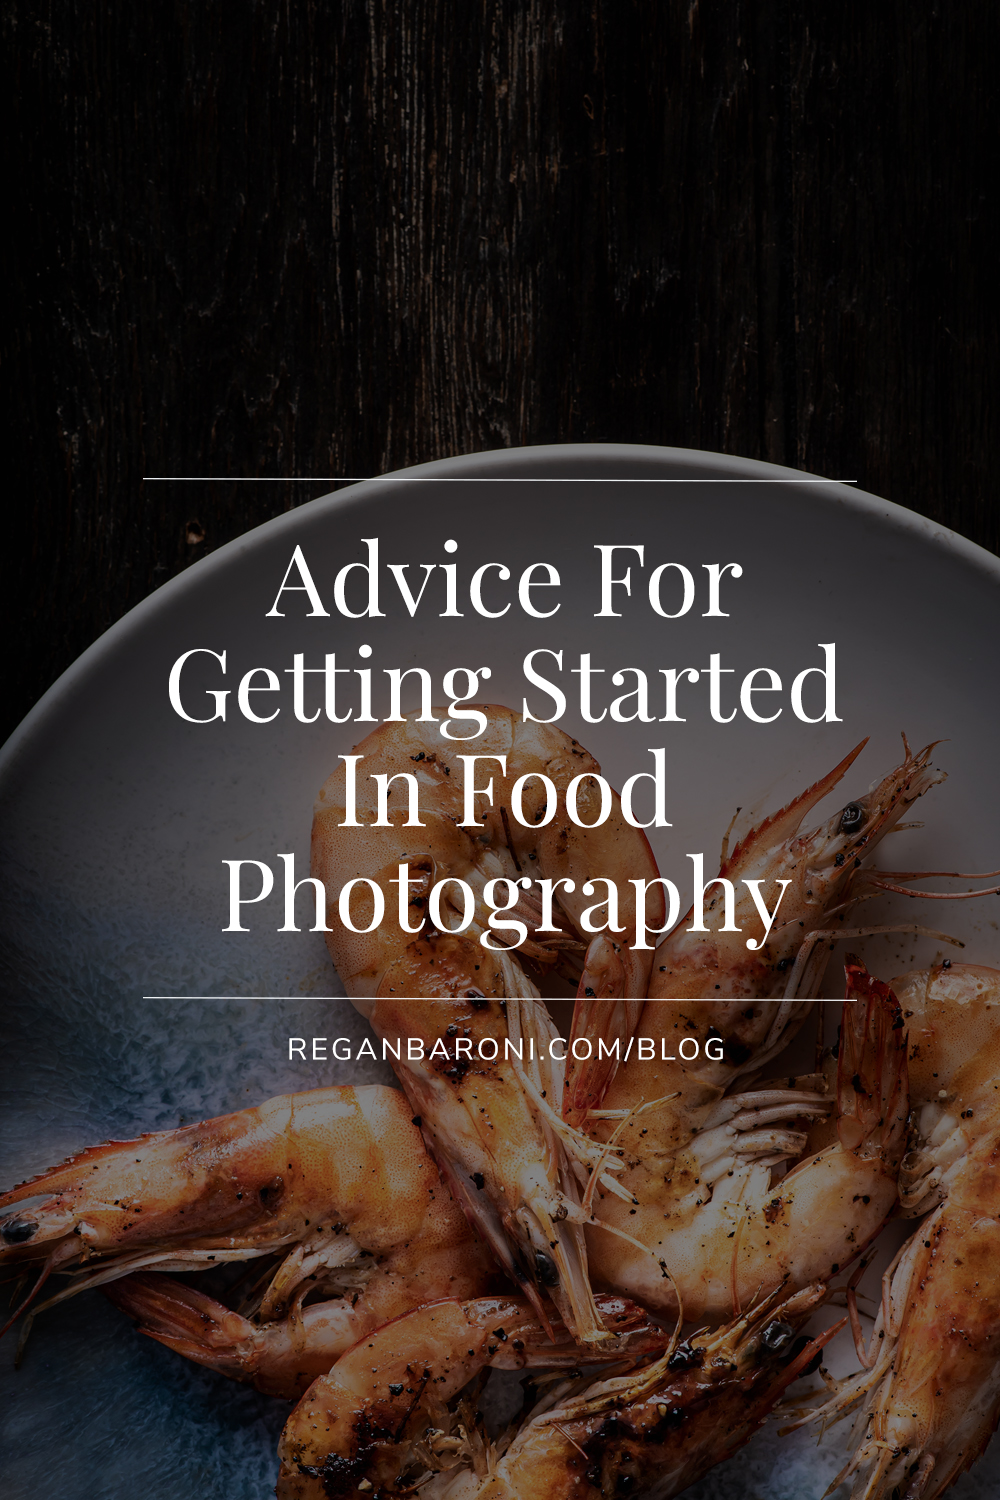 Advice For Getting Started In Food Photography